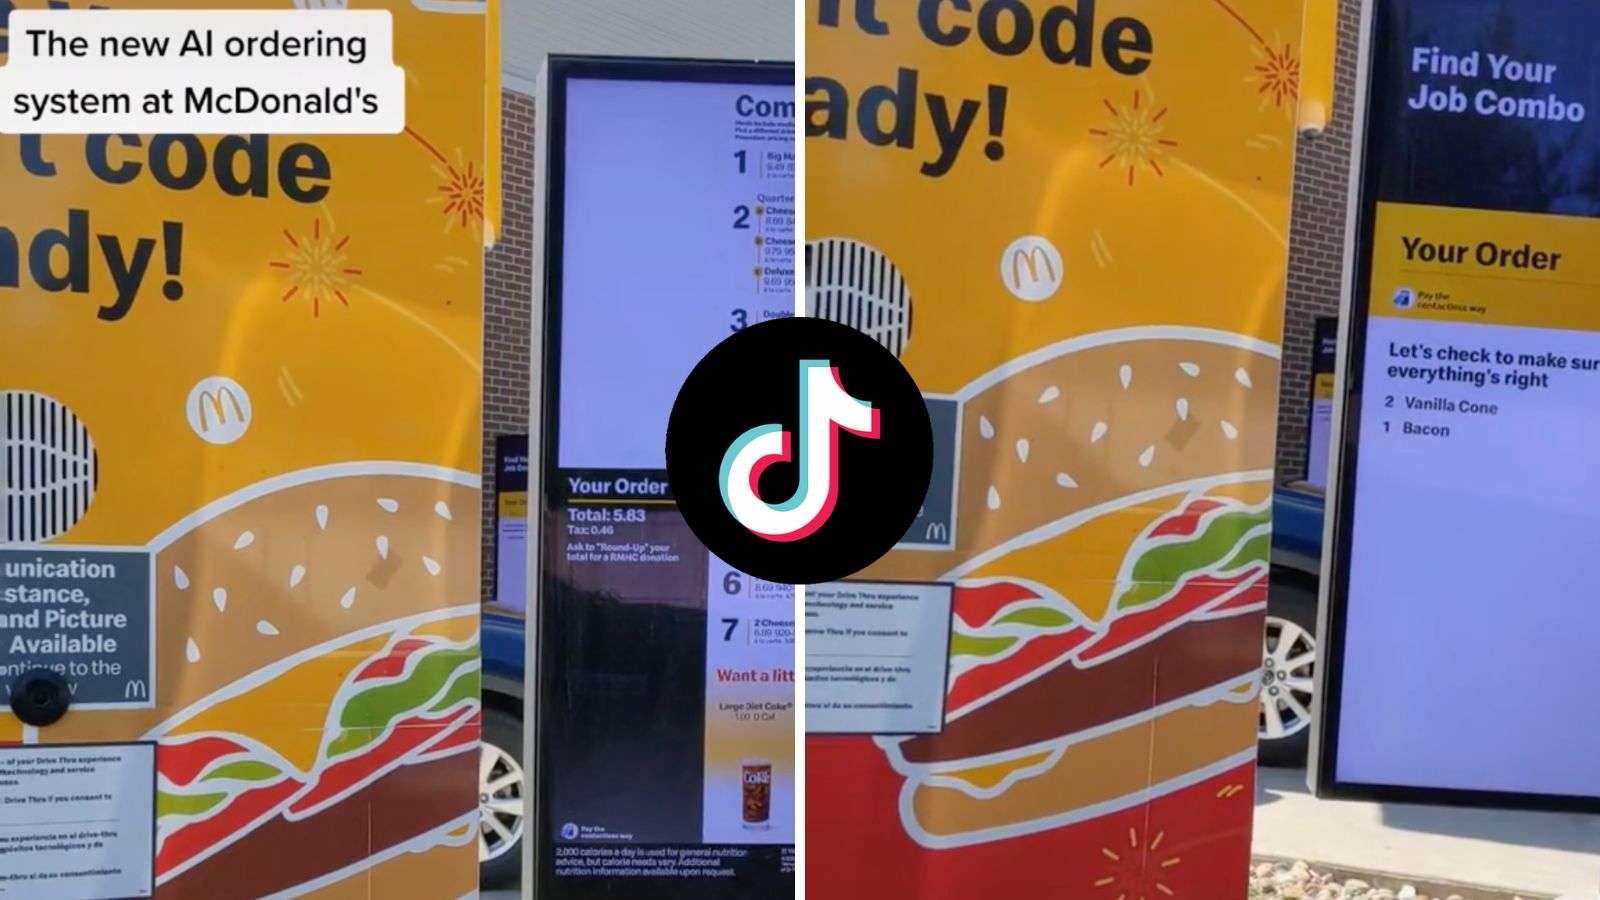 TikToker tries to order via McDonald’s AI drive-thru and it ends in disaster